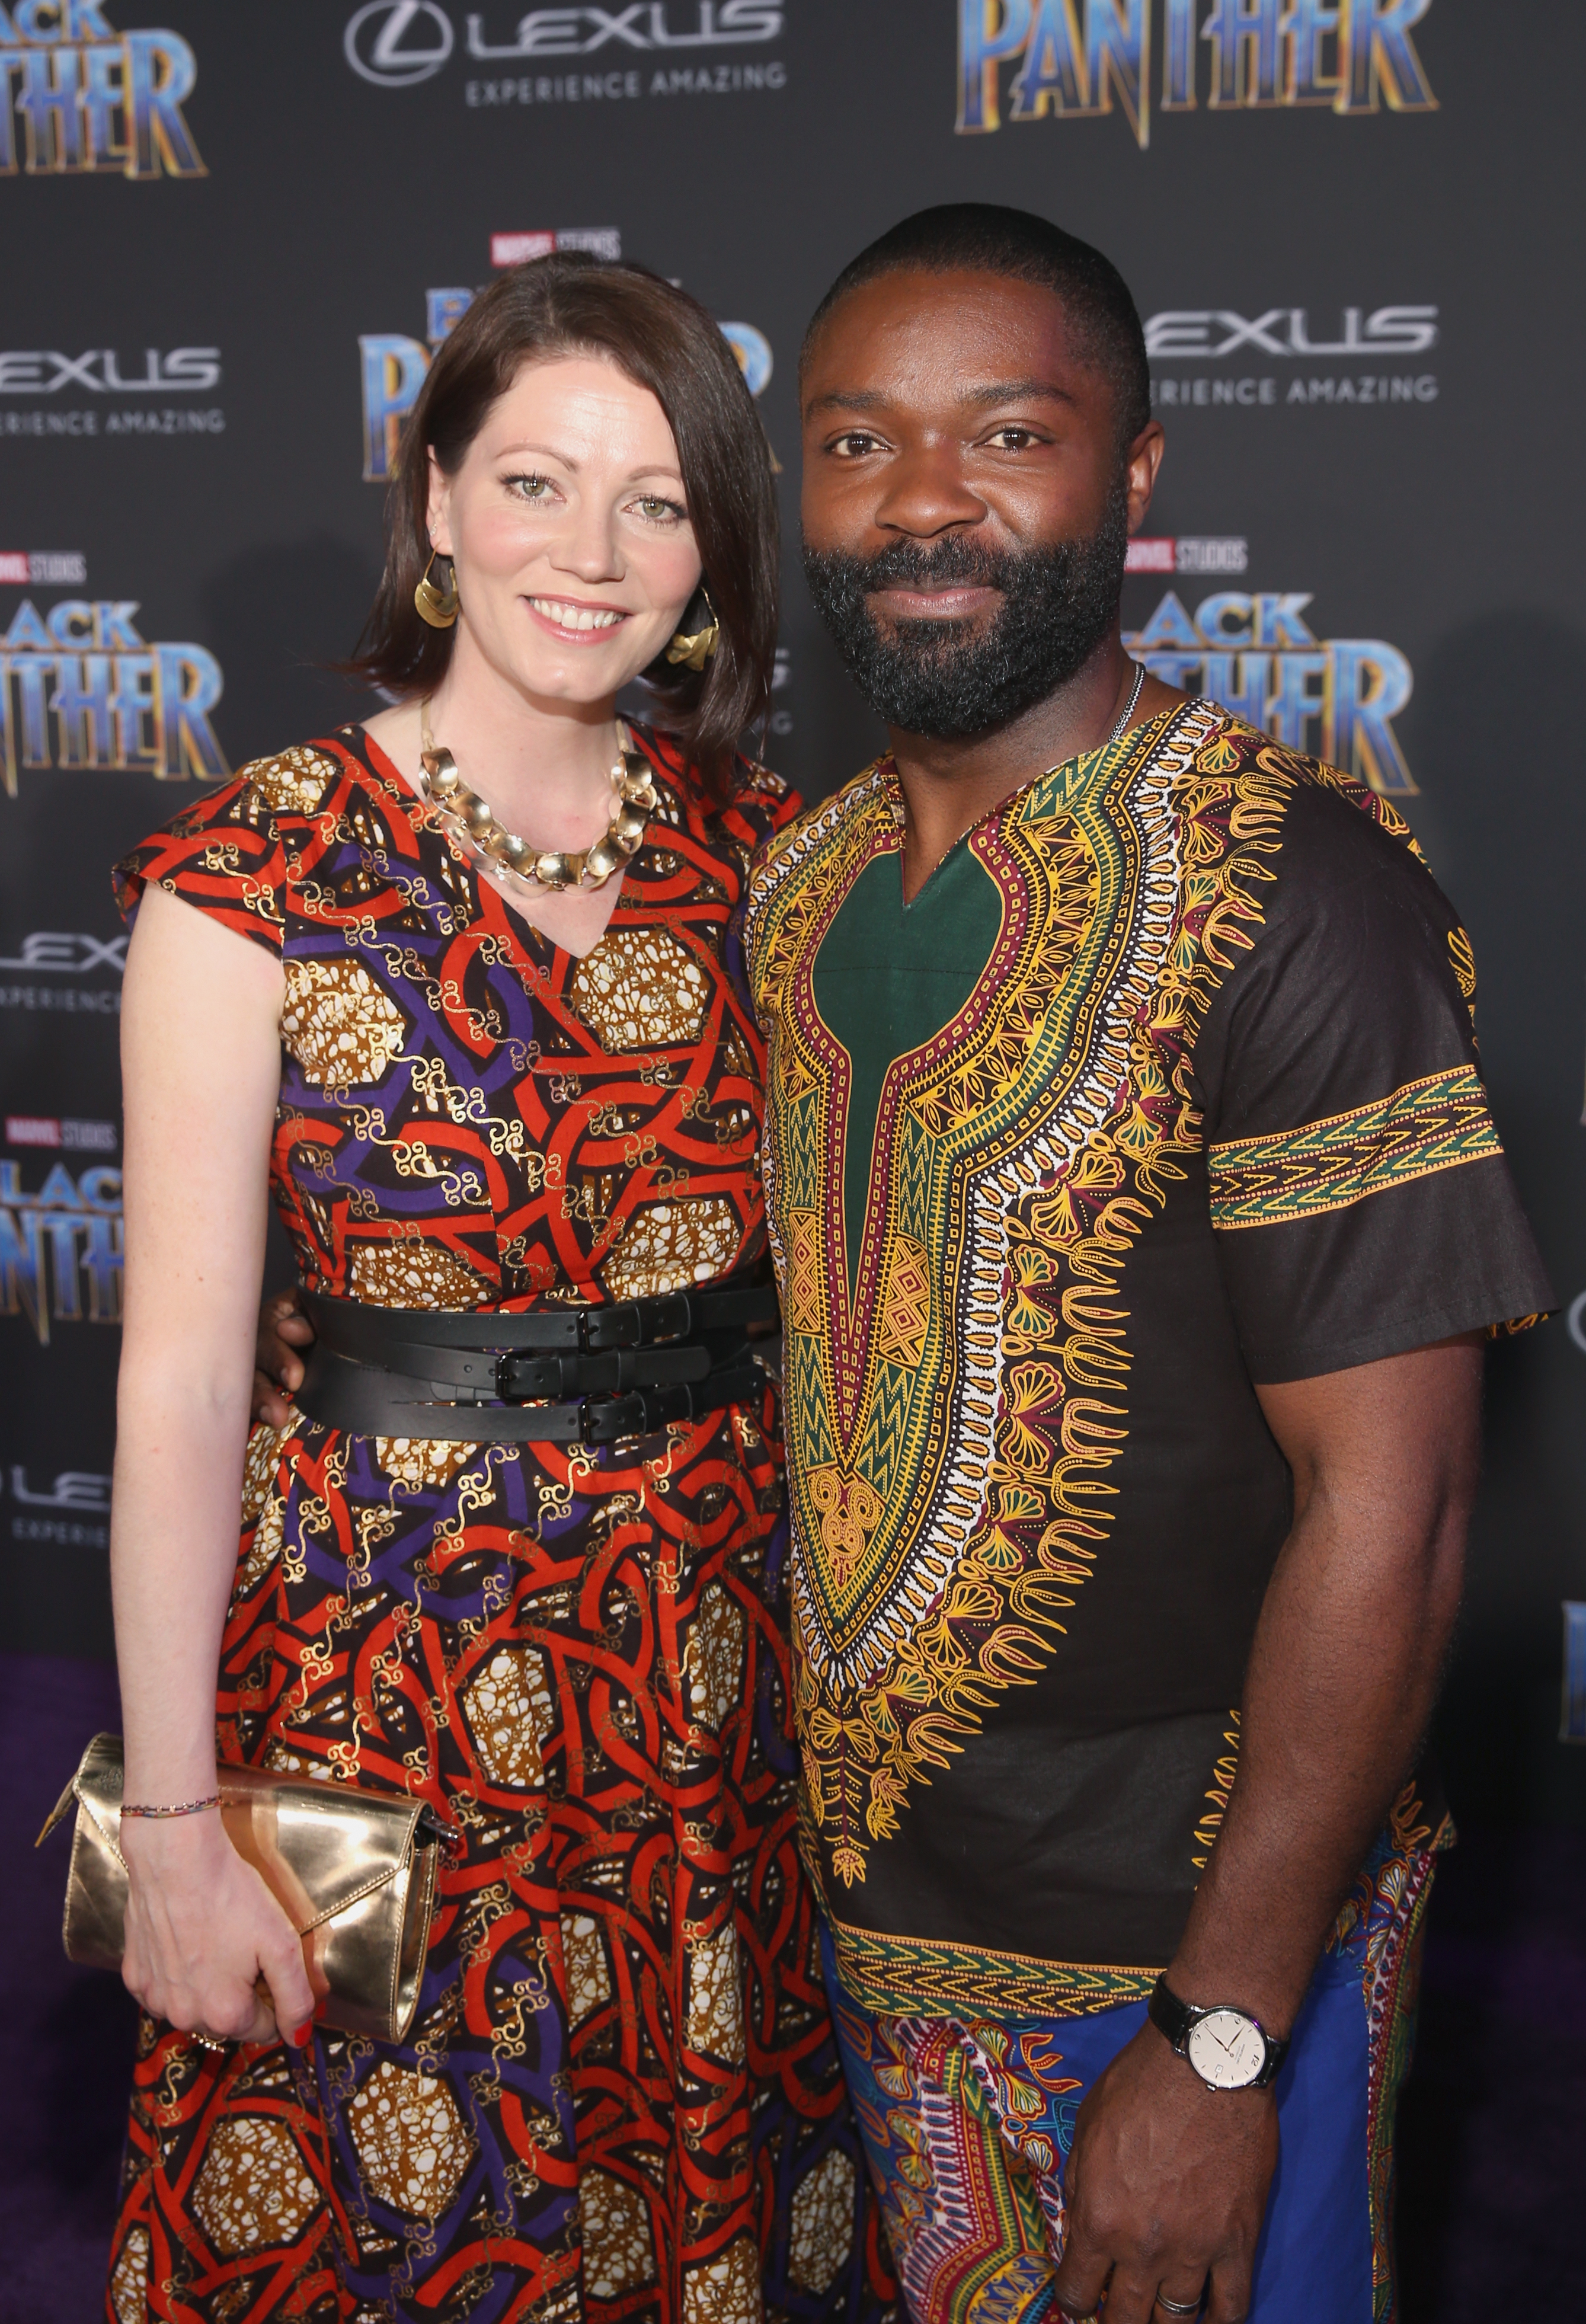 Jessica and David Oyelowo at the Los Angeles World Premiere of "Black Panther" on January 29, 2018, in Hollywood, California. | Source: Getty Images